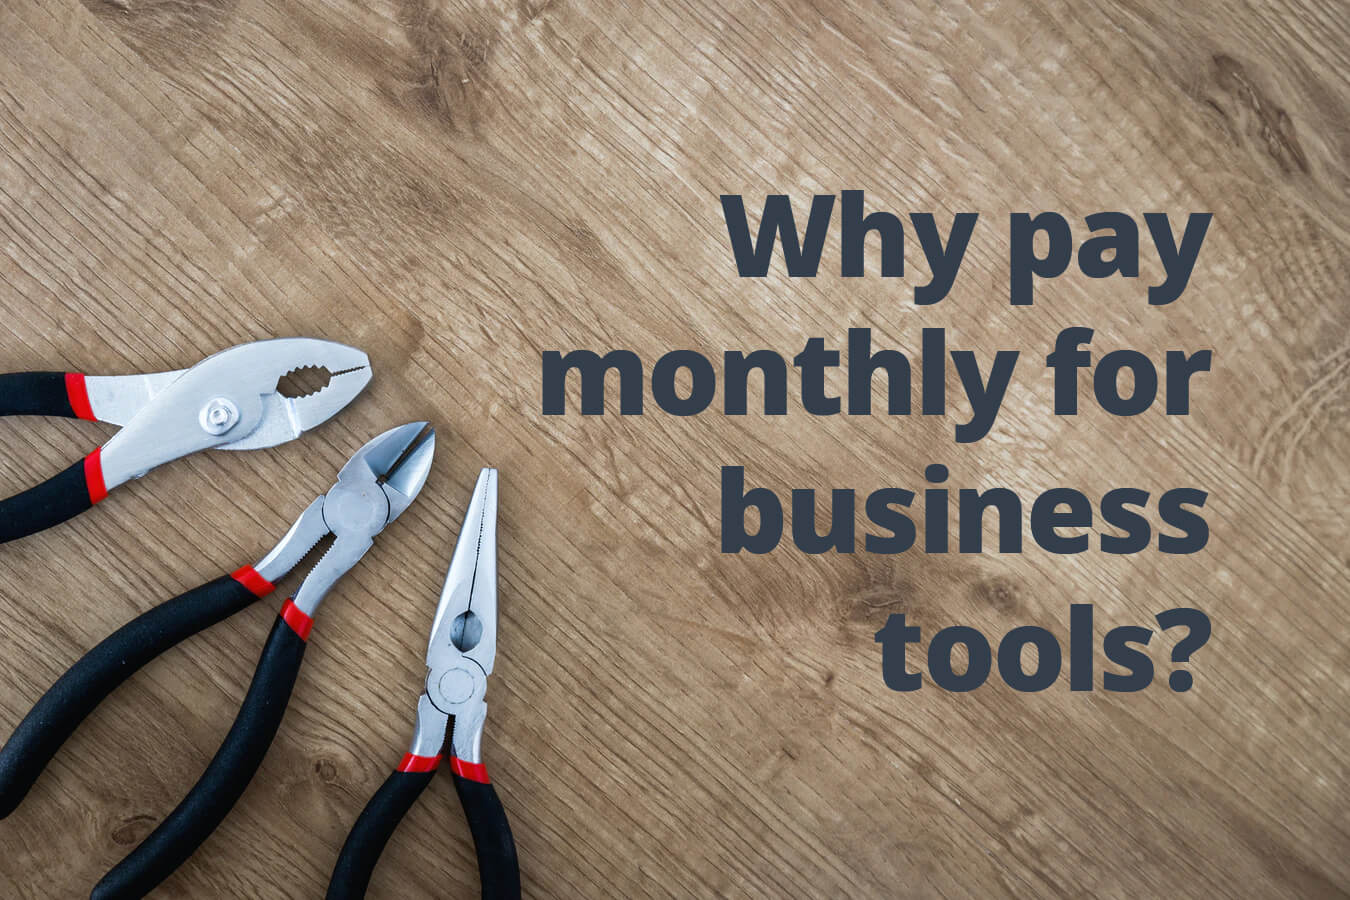 Why pay monthly for business tools?